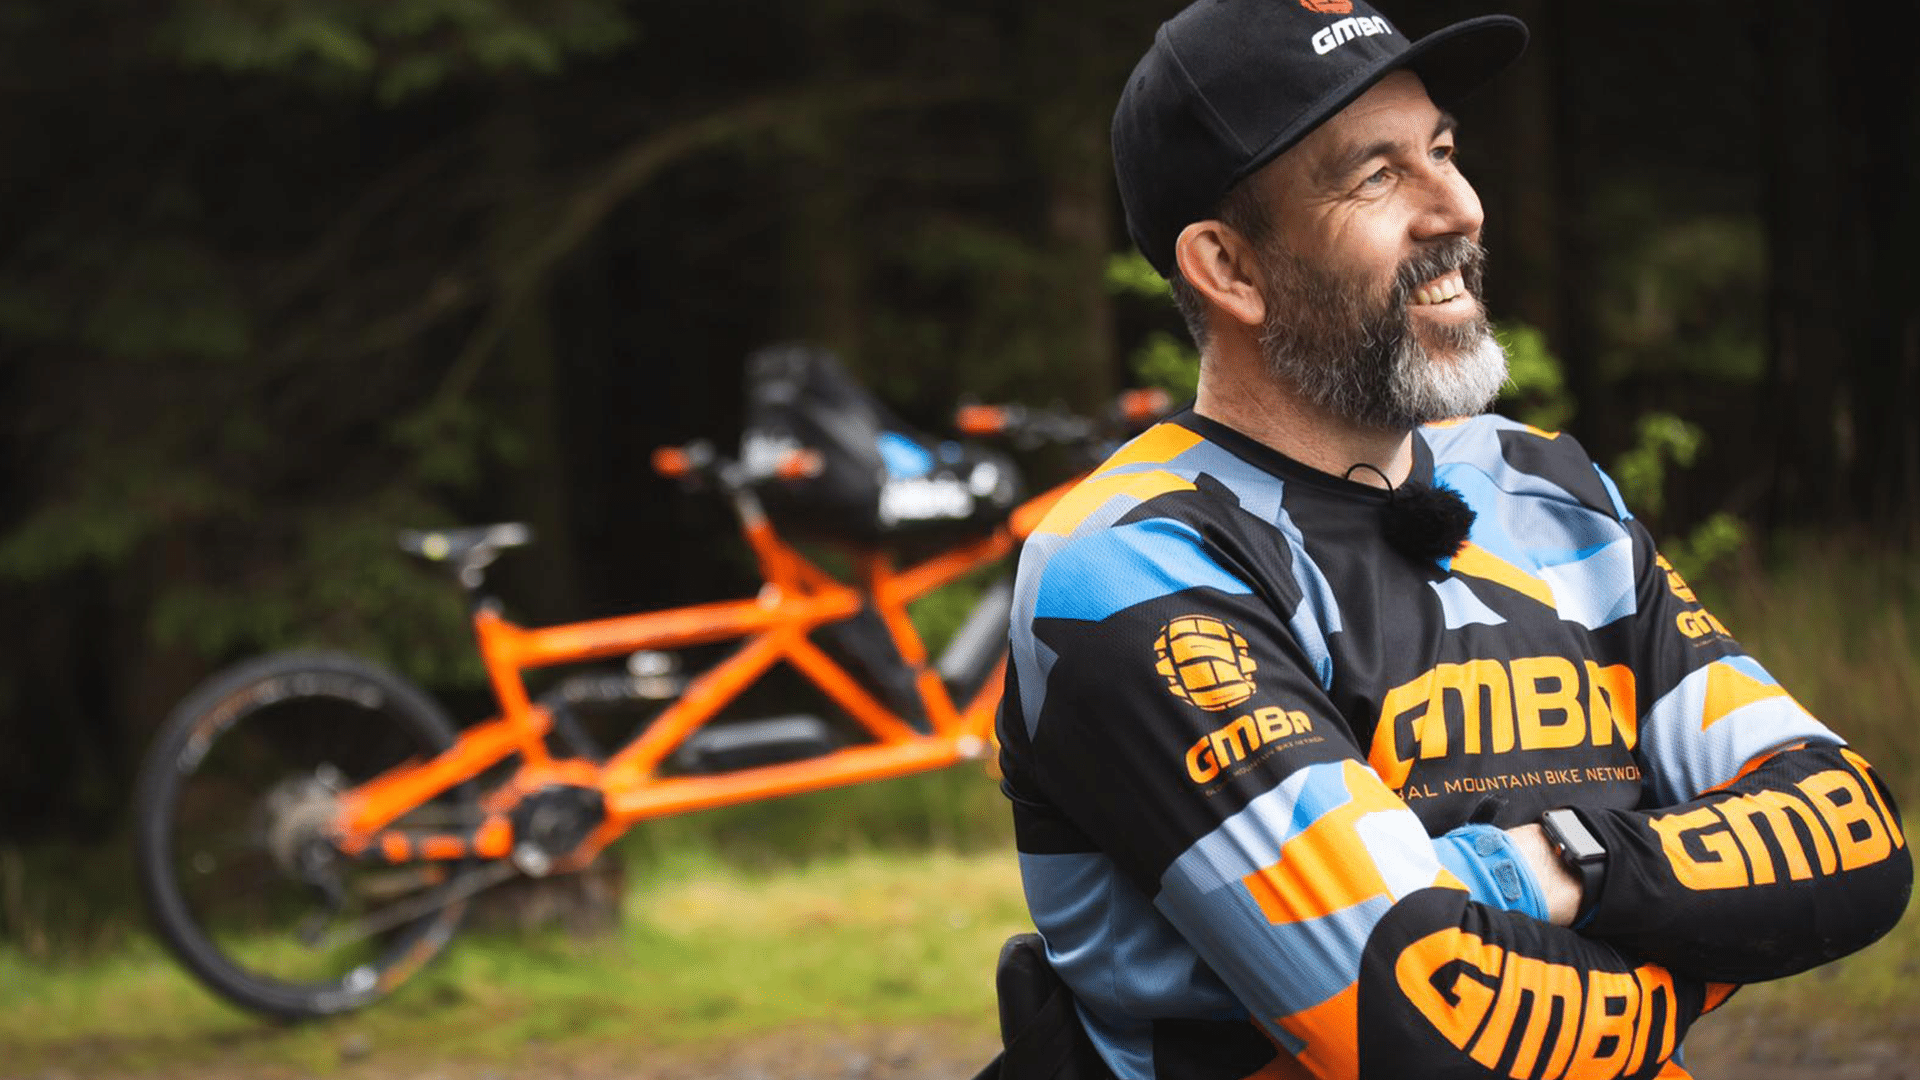 Martyn Ashton Bike Party promotional photo. Background: Forest. Tall trees. An orange coloured two person mountain bicycle, with the front of the bicycle adapted for a disabled rider. Foreground: (right) Martyn Ashton, wearing a black 'GMBN' hat and a black, blue and orange 'GMBN' mountain bike rider's jersey, crossing their arms and smiling.